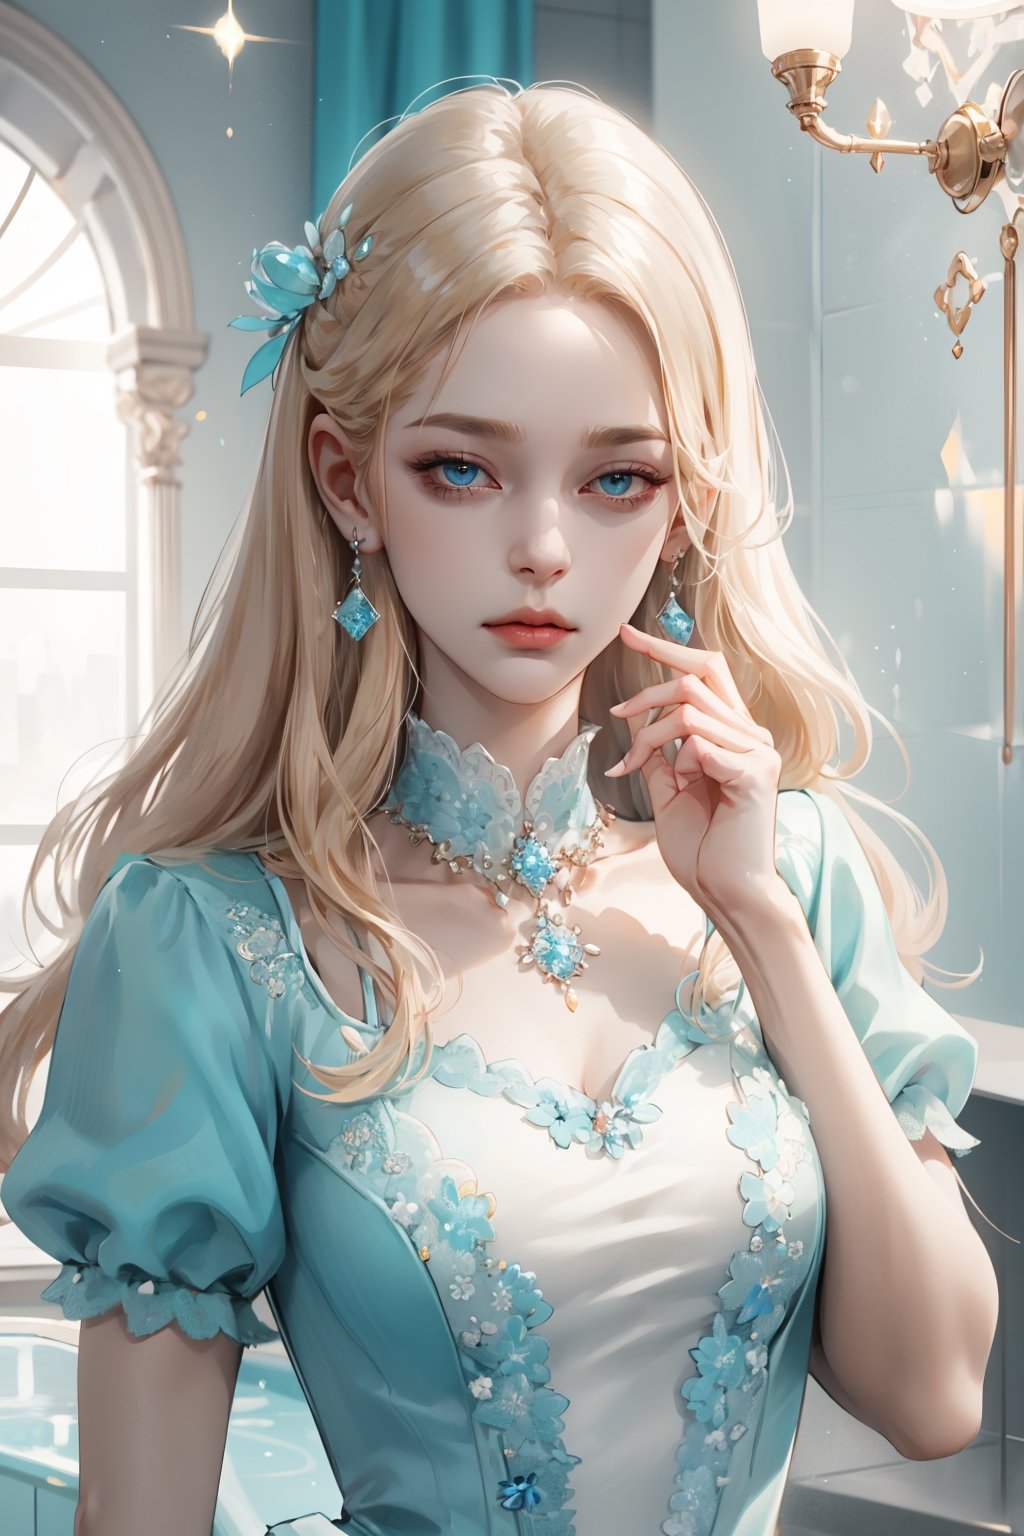 (asterpiece:1.2, best quality), (Soft light), (shiny skin), 1girl,  kingdom, blonde hair, victorian, tosca eyes, long_blonde_hair_girl , formal dress, bathroom, shock face, shock, aquamarine necklace, aquamarine earings, shock face, hands covered mouth